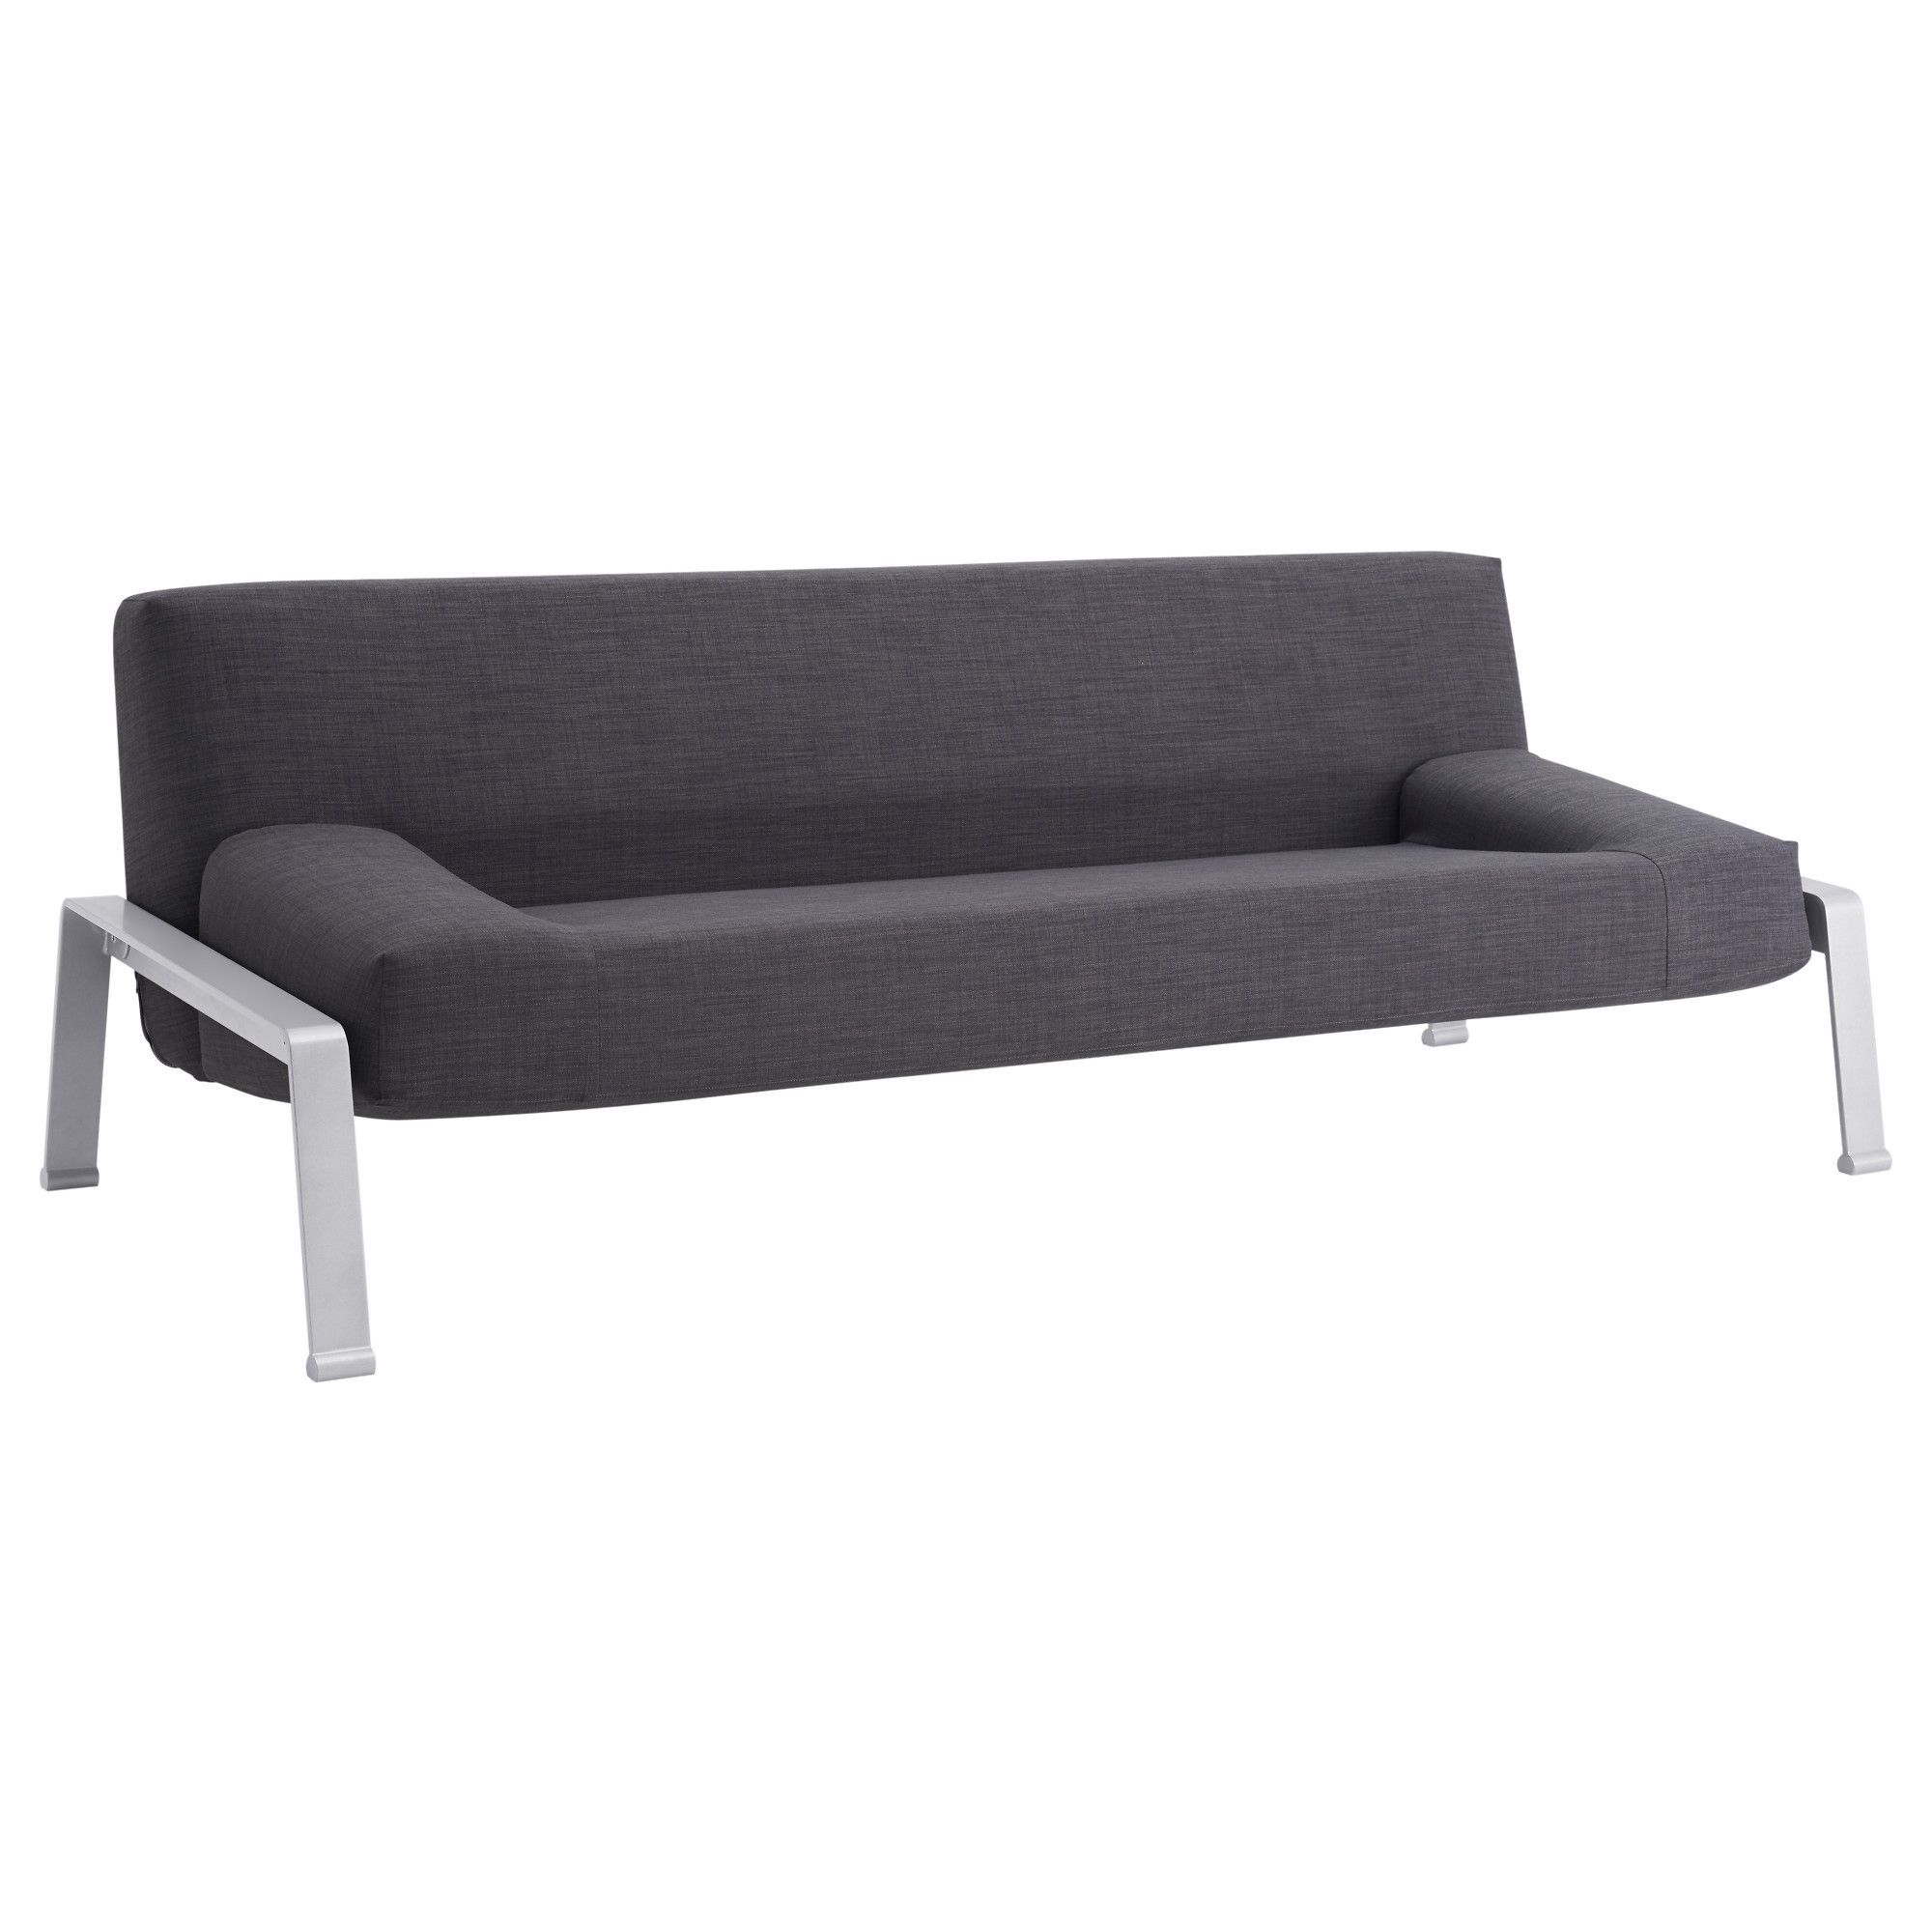 Ikea Small Sofas Inside Most Up To Date Sofa : Winsome Small Sofa Bed Ikea Solsta Reviews Cute As Sofas (View 11 of 20)